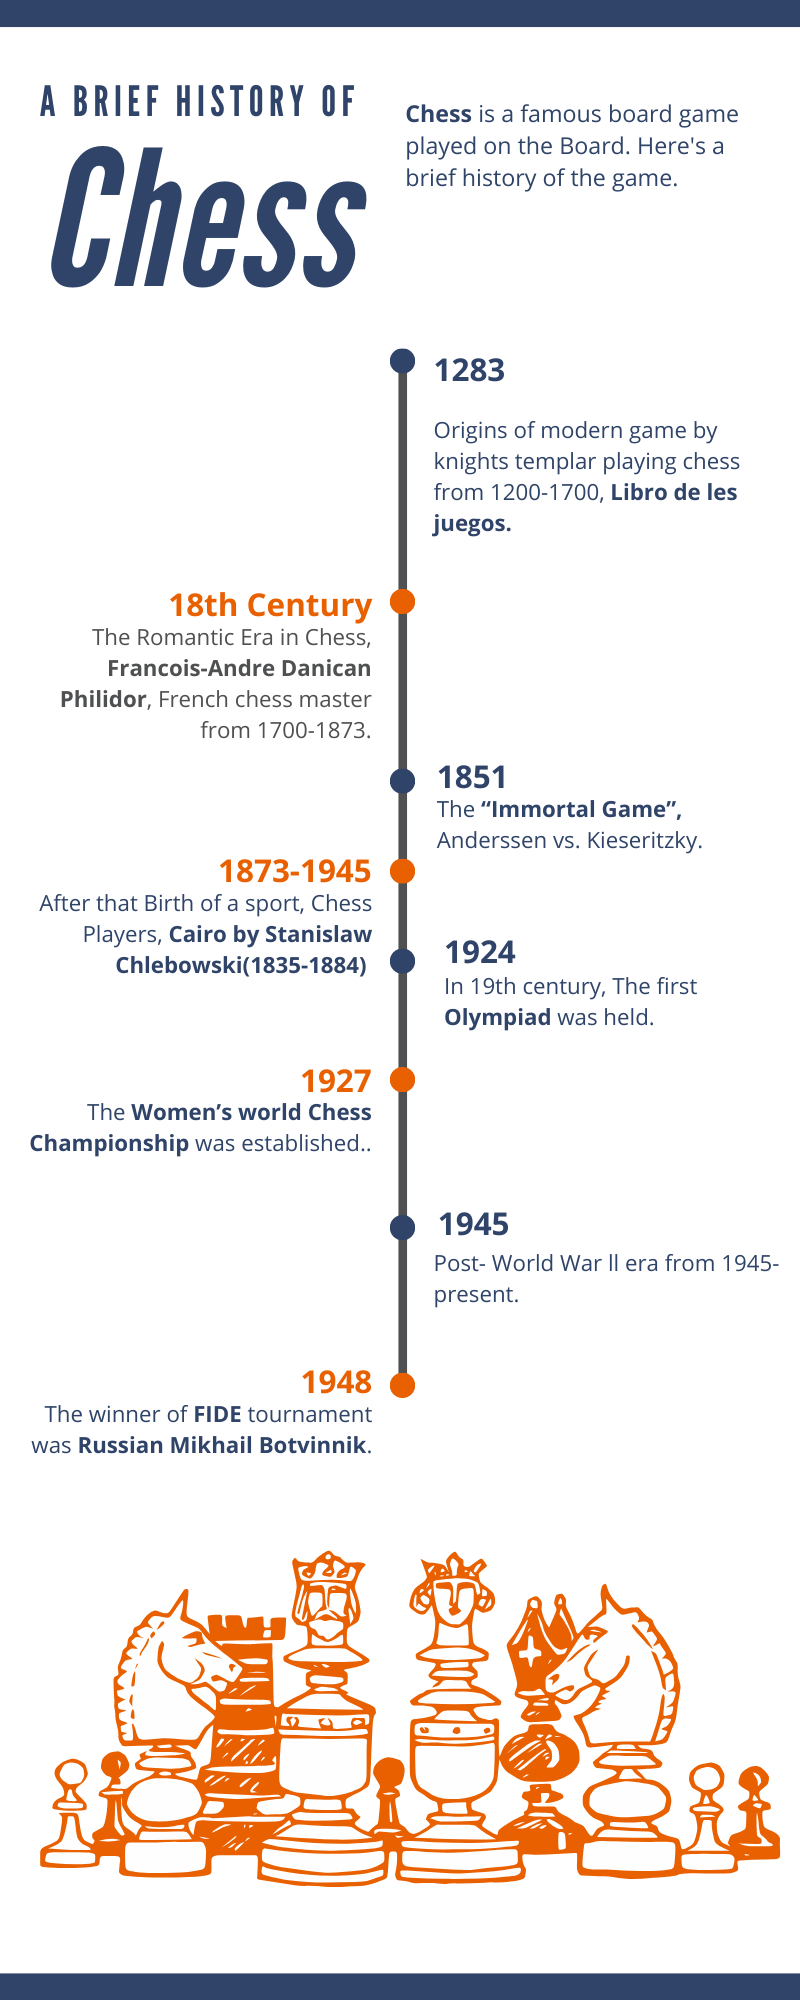 The Brief history of Chess